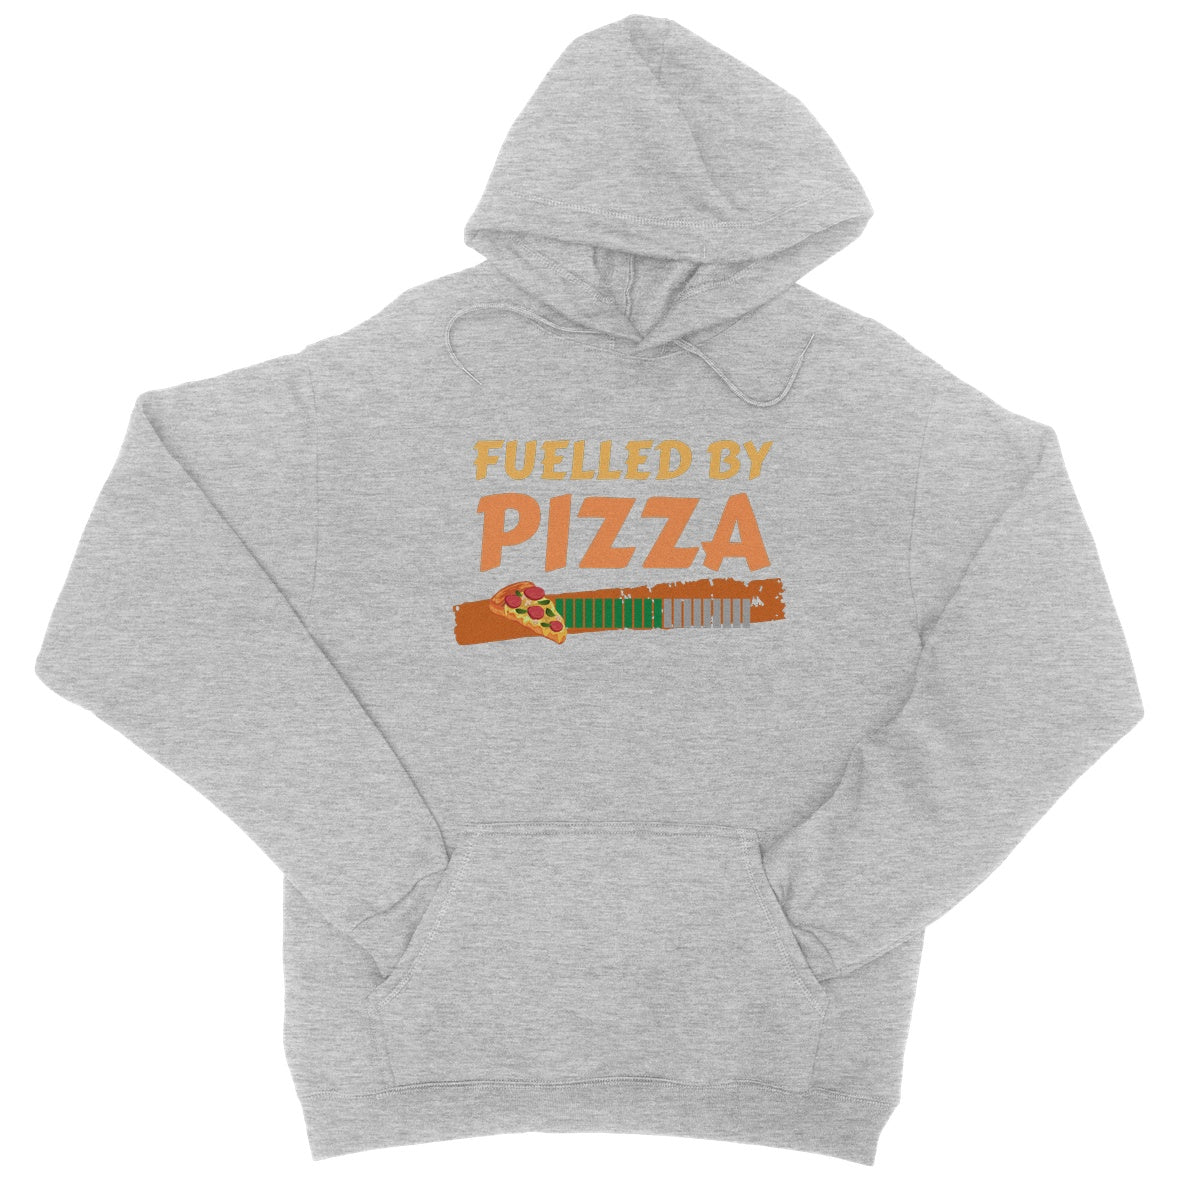 fuelled by pizza hoodie light grey